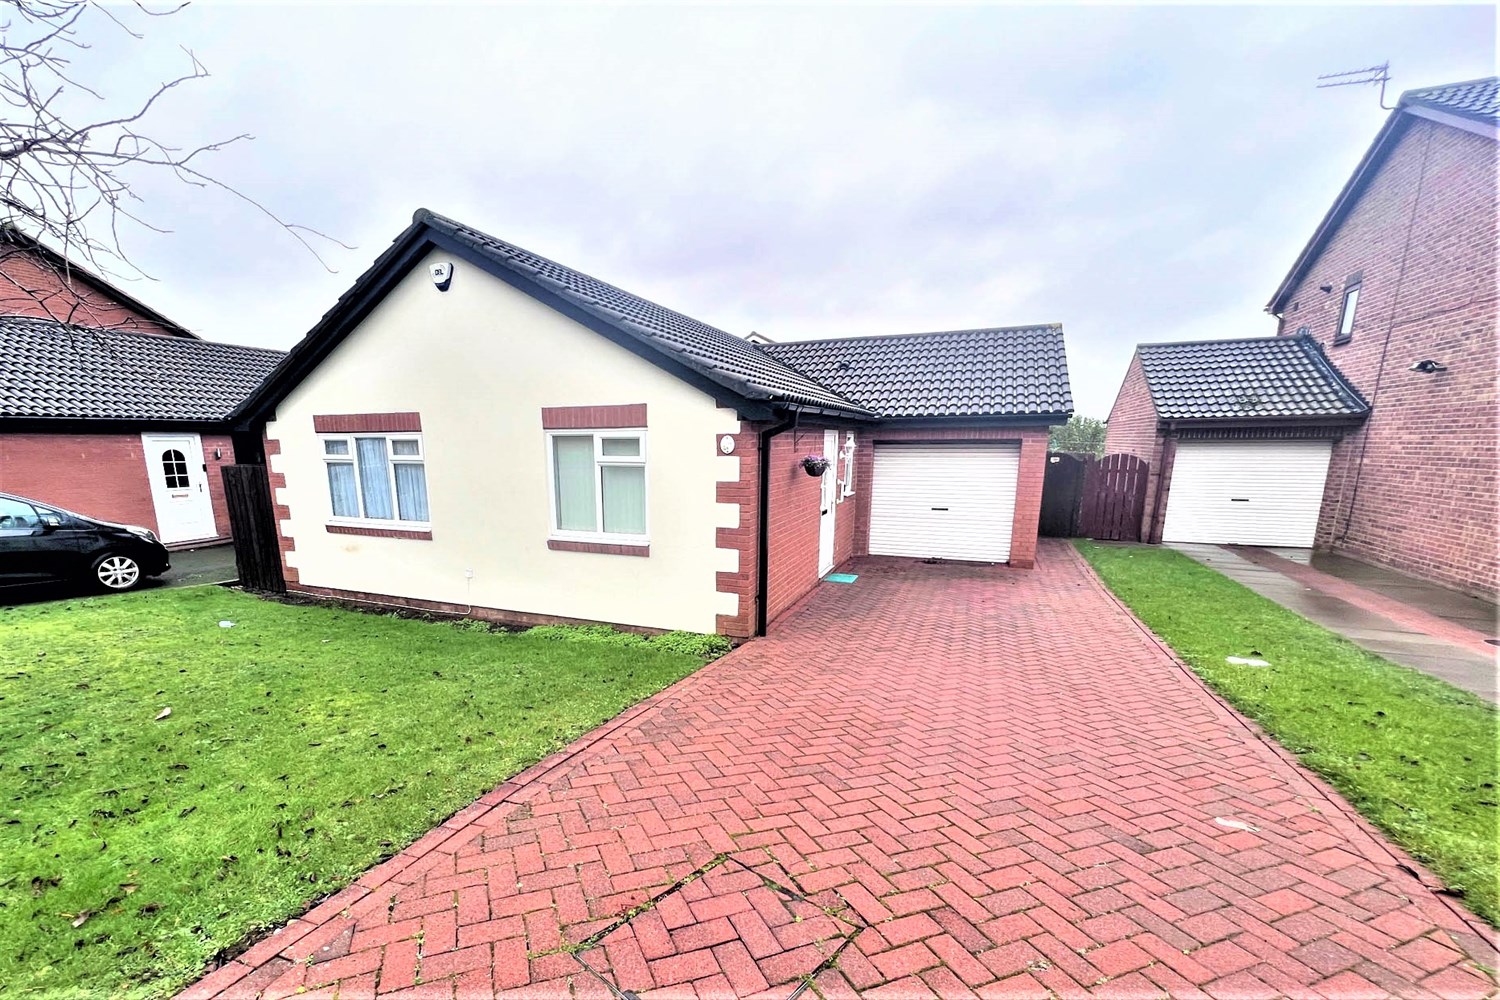 2 bed detached bungalow for sale in Beaconside, South Shields - Property Image 1